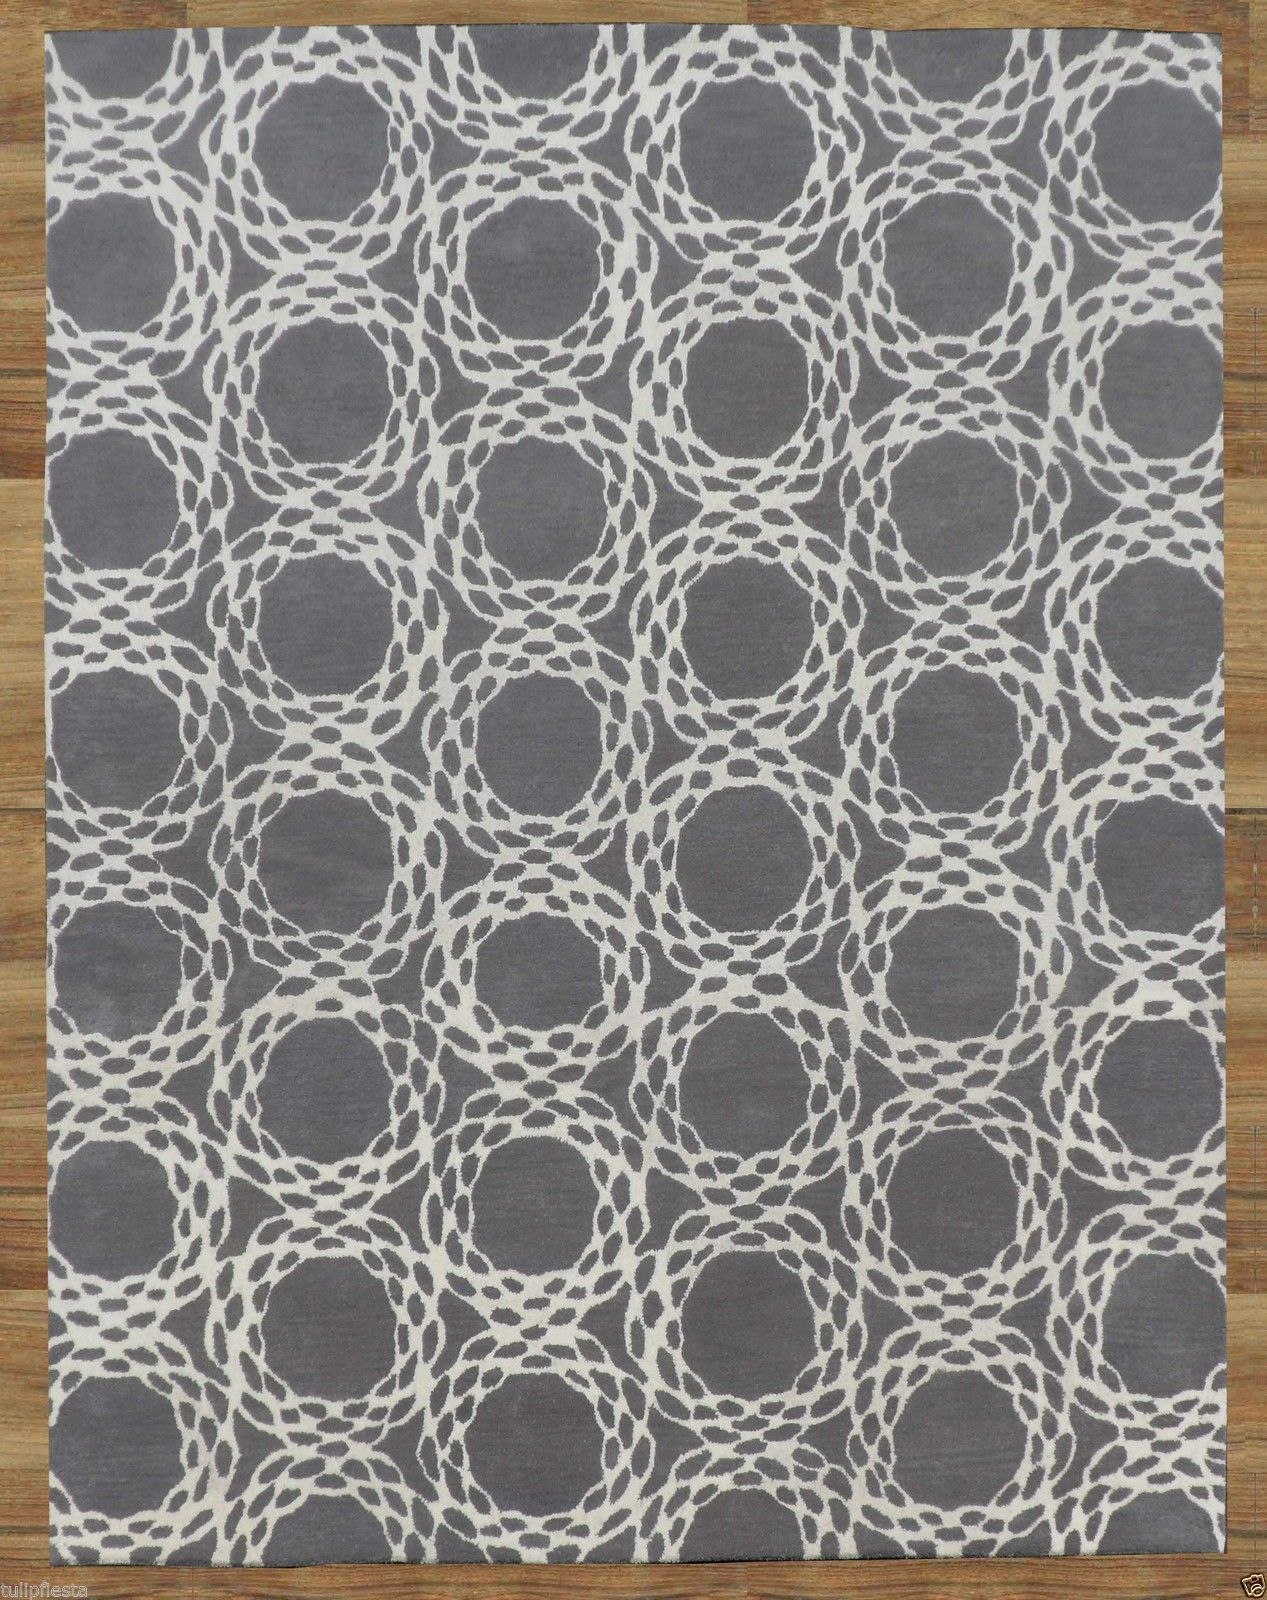 Arabesque Scroll Gray 9' x 12'  Handmade 100% Wool Area Rug 2000-Now and Floral - $799.00